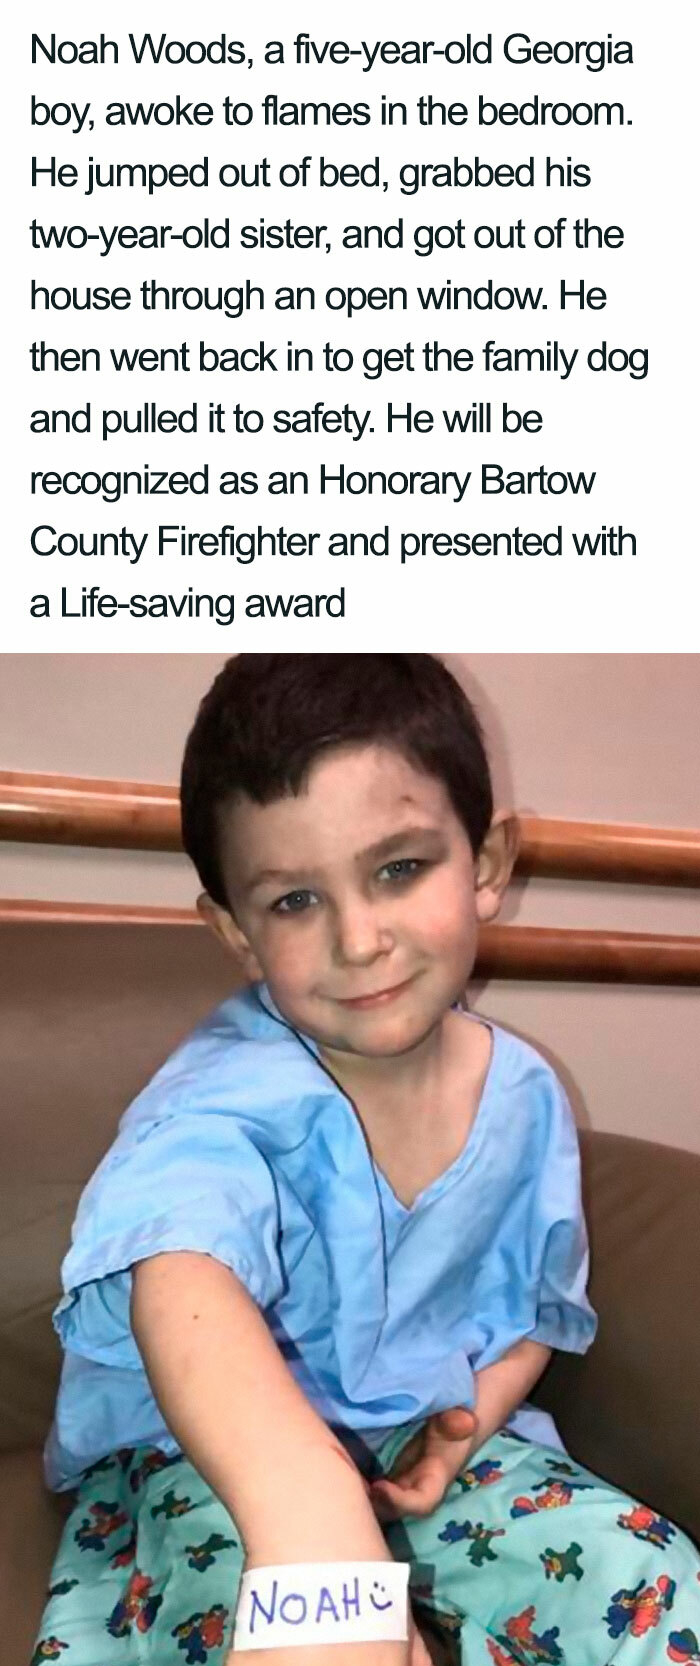 noah woods - Noah Woods, a fiveyearold Georgia boy, awoke to flames in the bedroom. He jumped out of bed, grabbed his twoyearold sister, and got out of the house through an open window. He then went back in to get the family dog and pulled it to safety. H